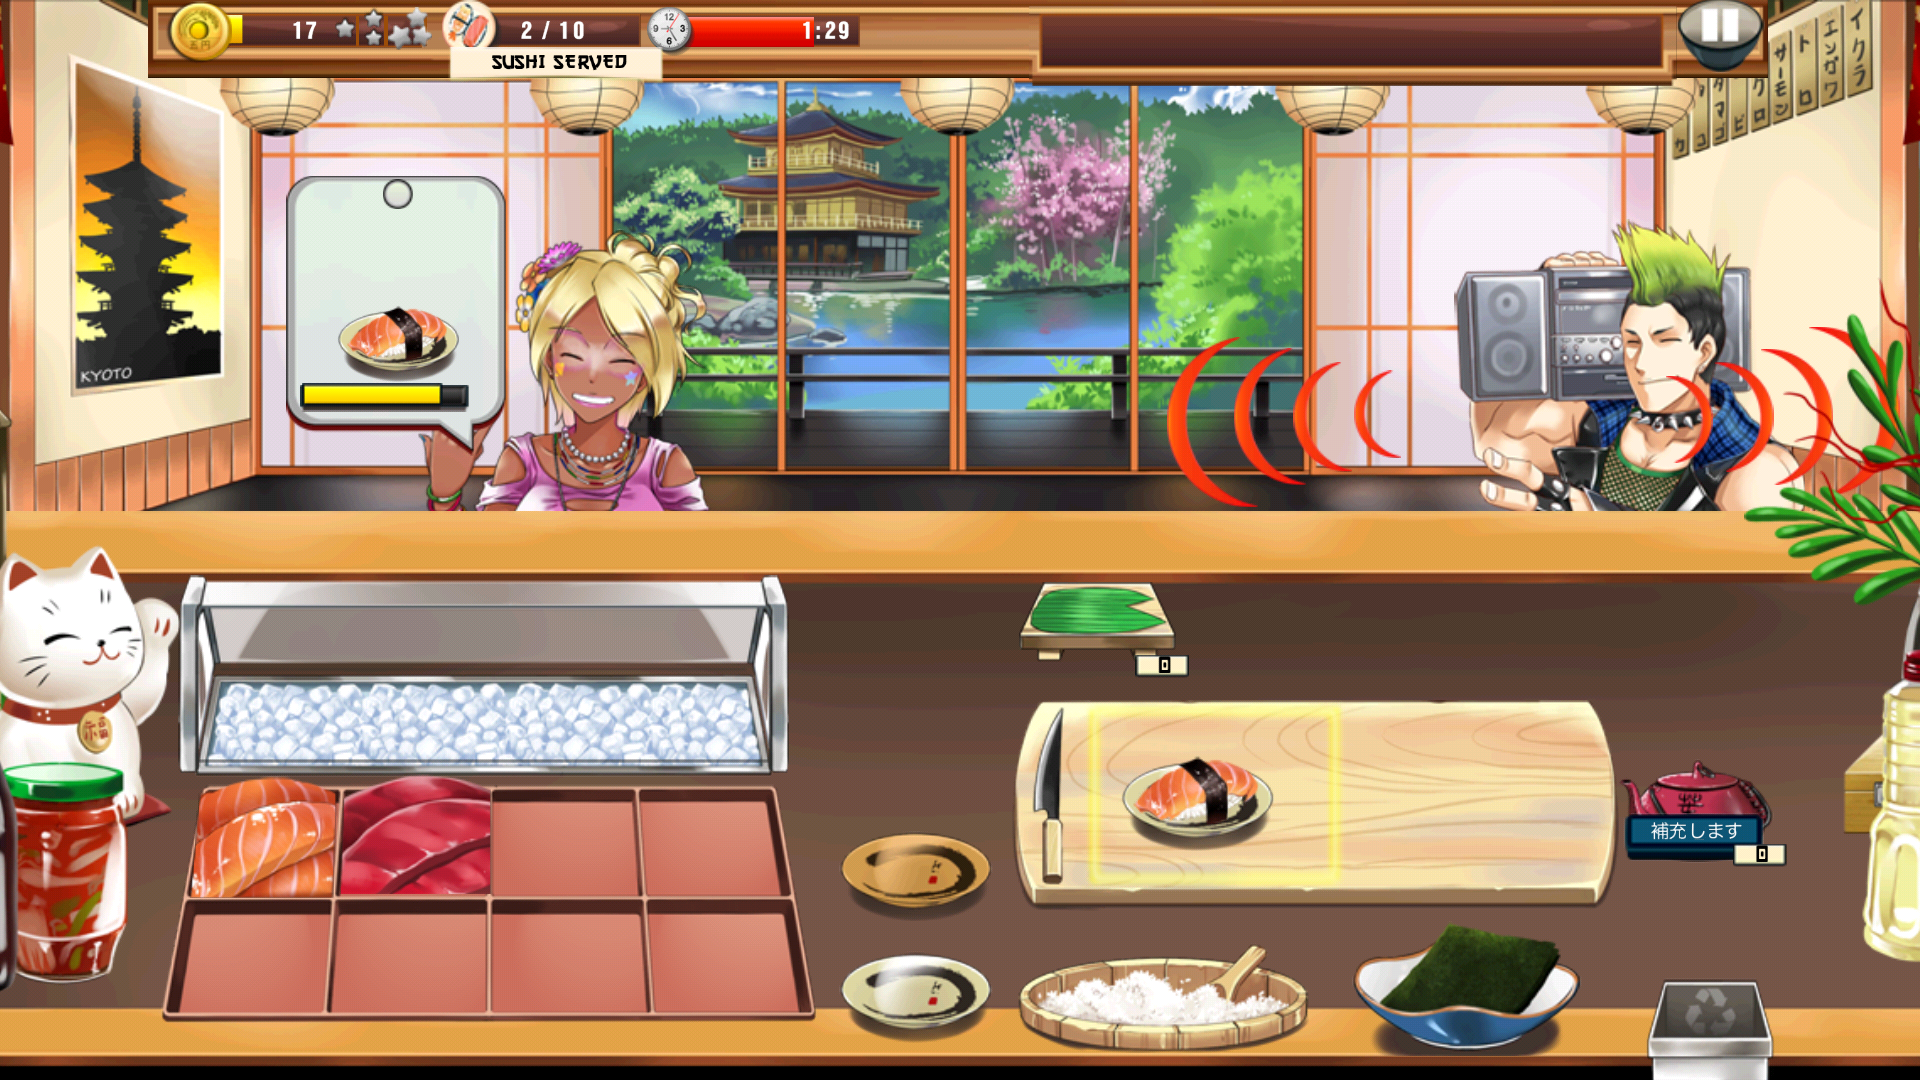 Sushi Diner - Fun Cooking Game androidアプリスクリーンショット2